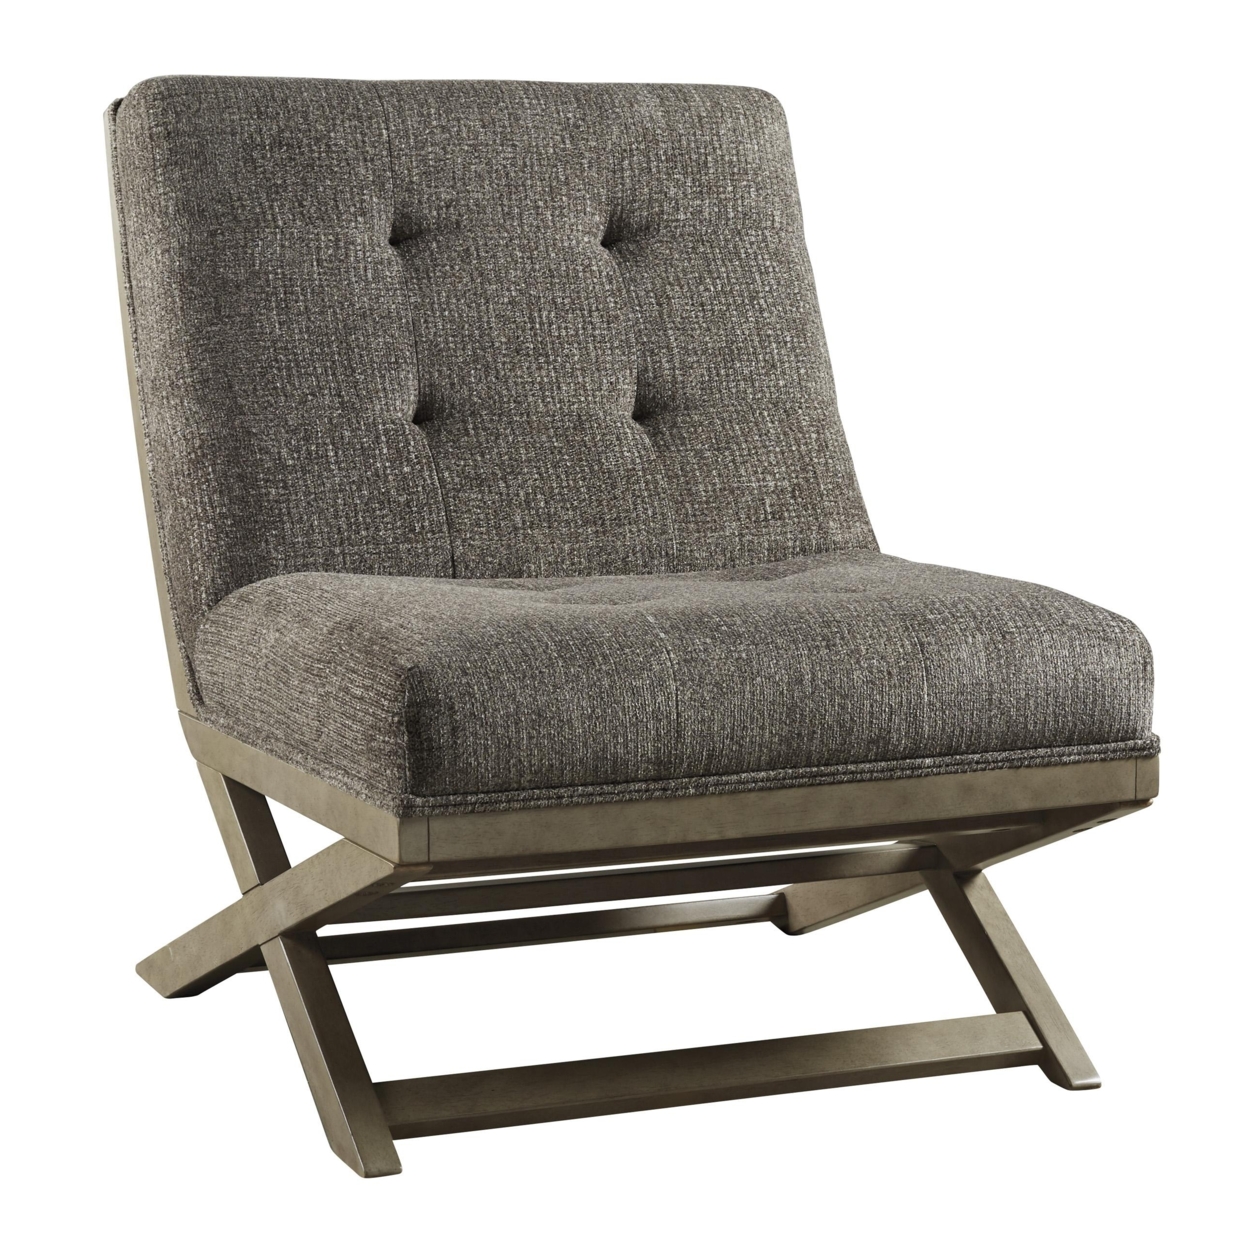 X Frame Base Wooden Accent Chair With Padded Seat And Back, Brown And Gray- Saltoro Sherpi